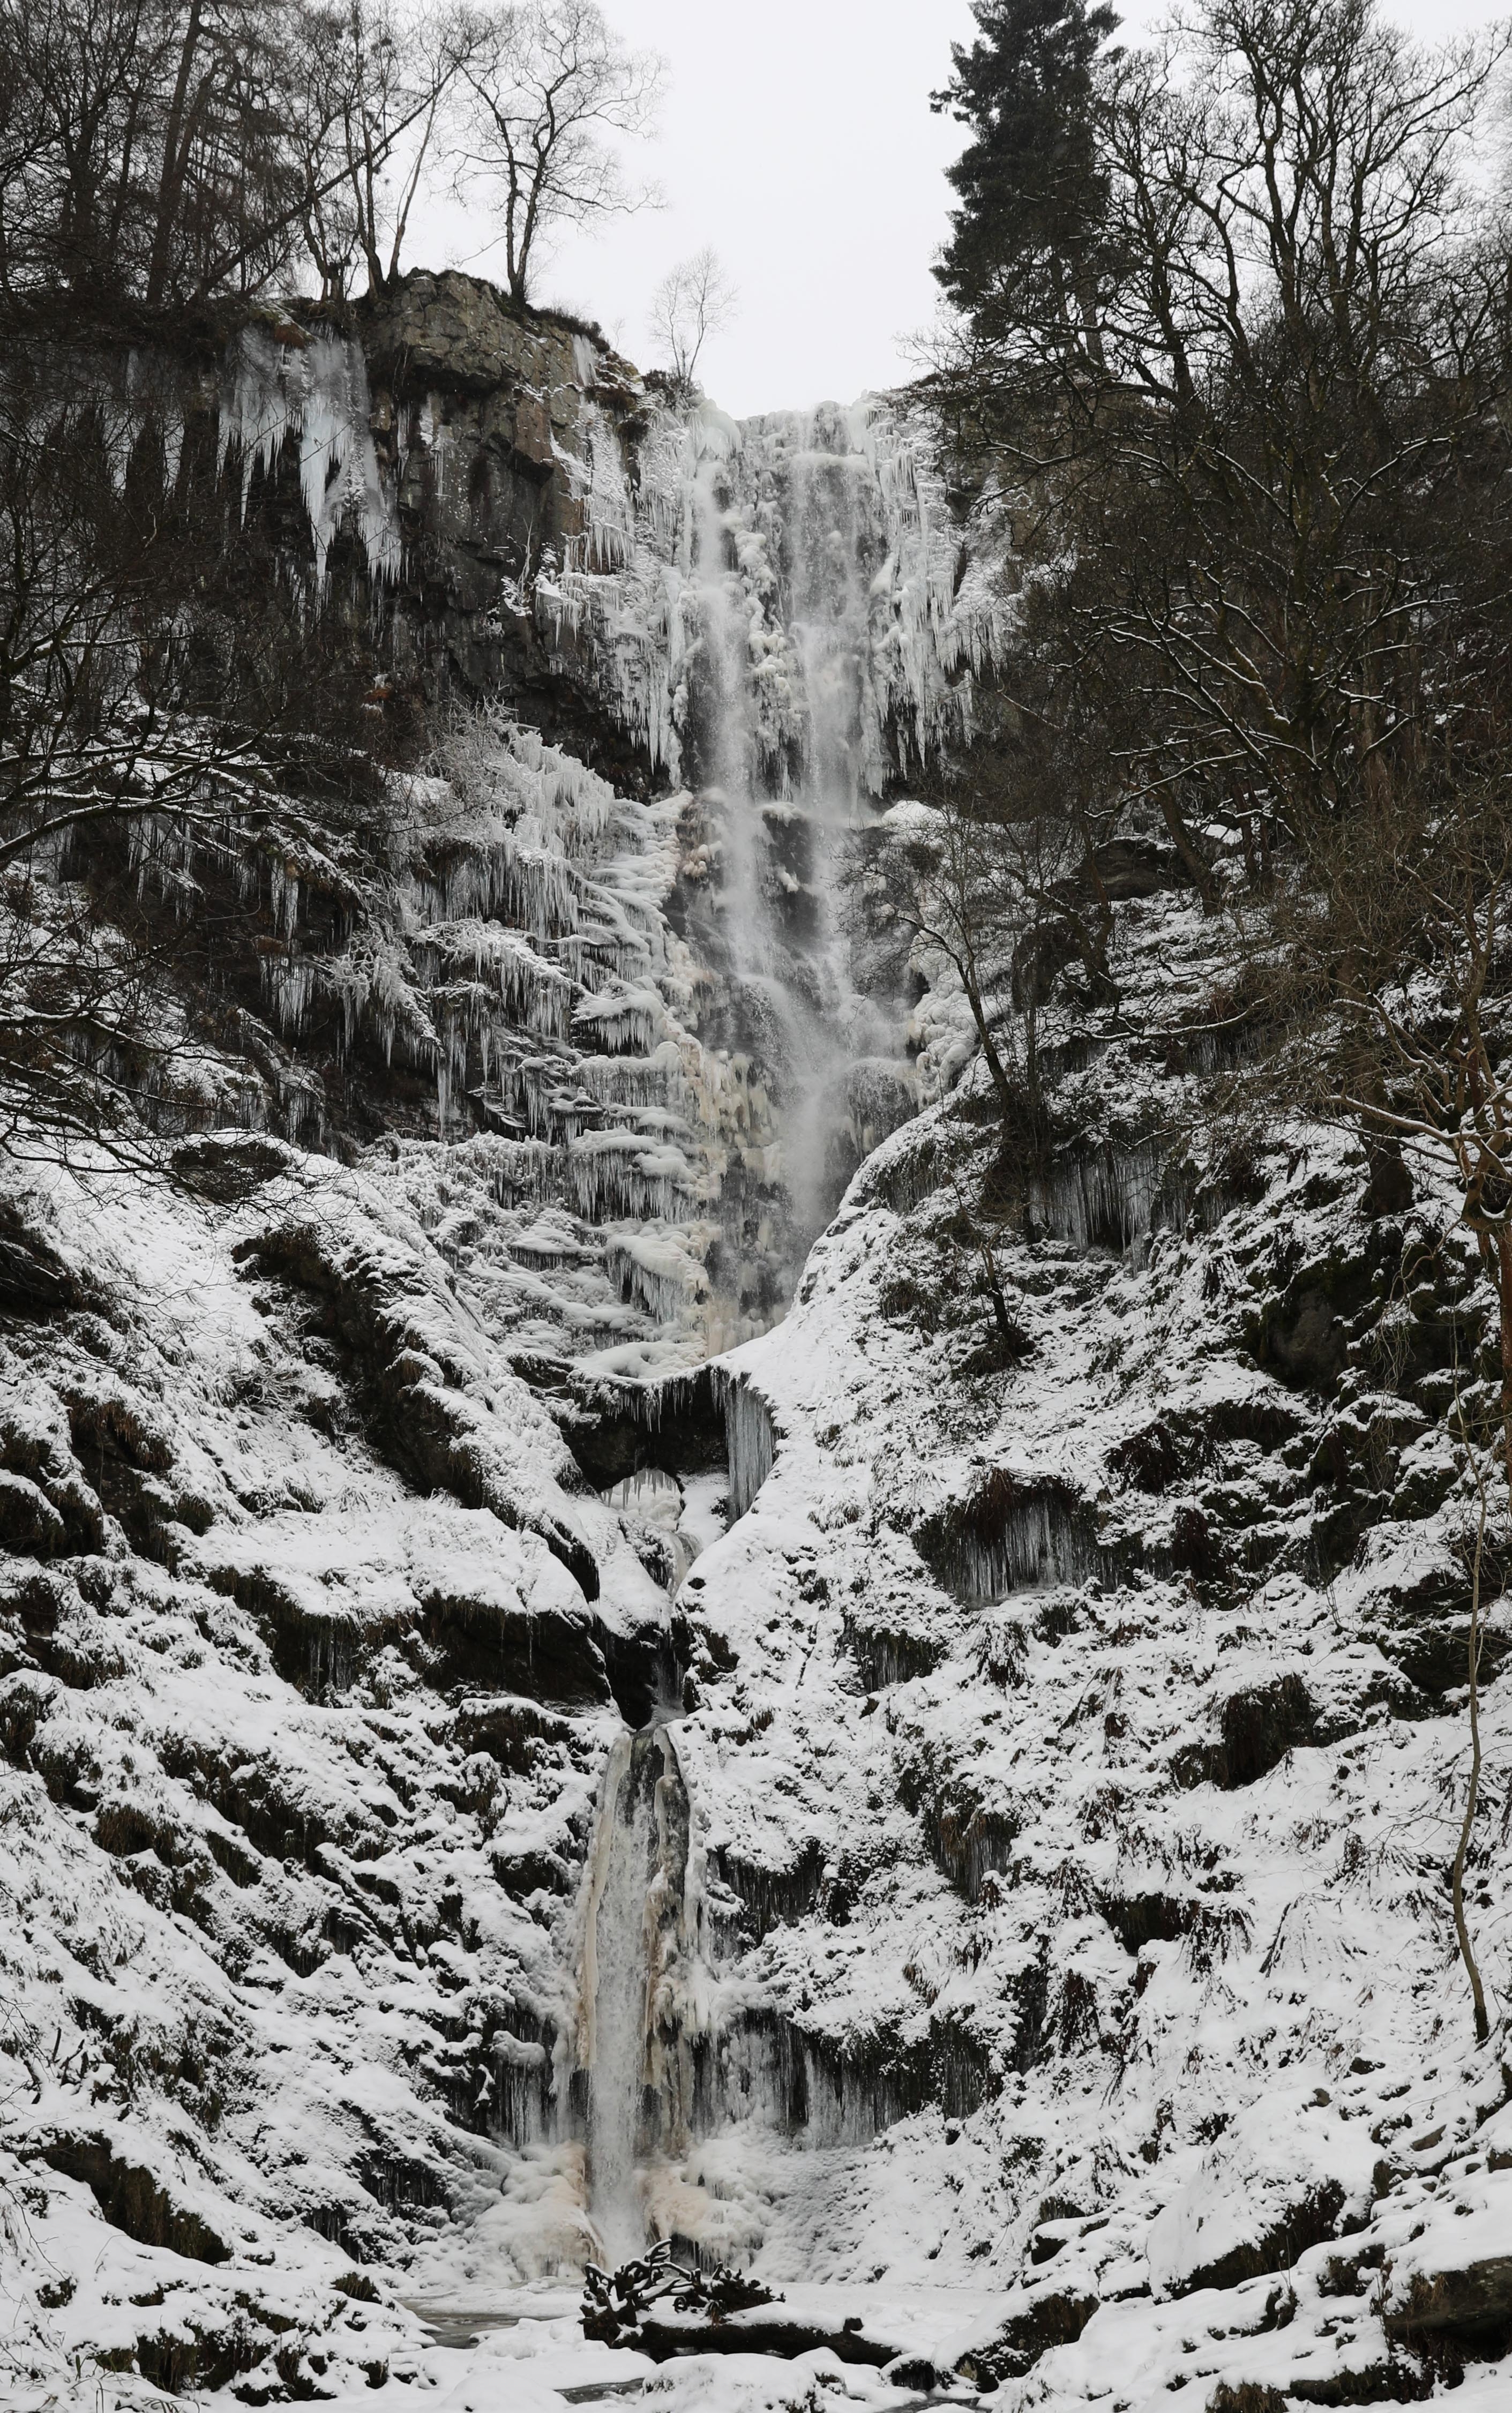 waterfall iced over this winter